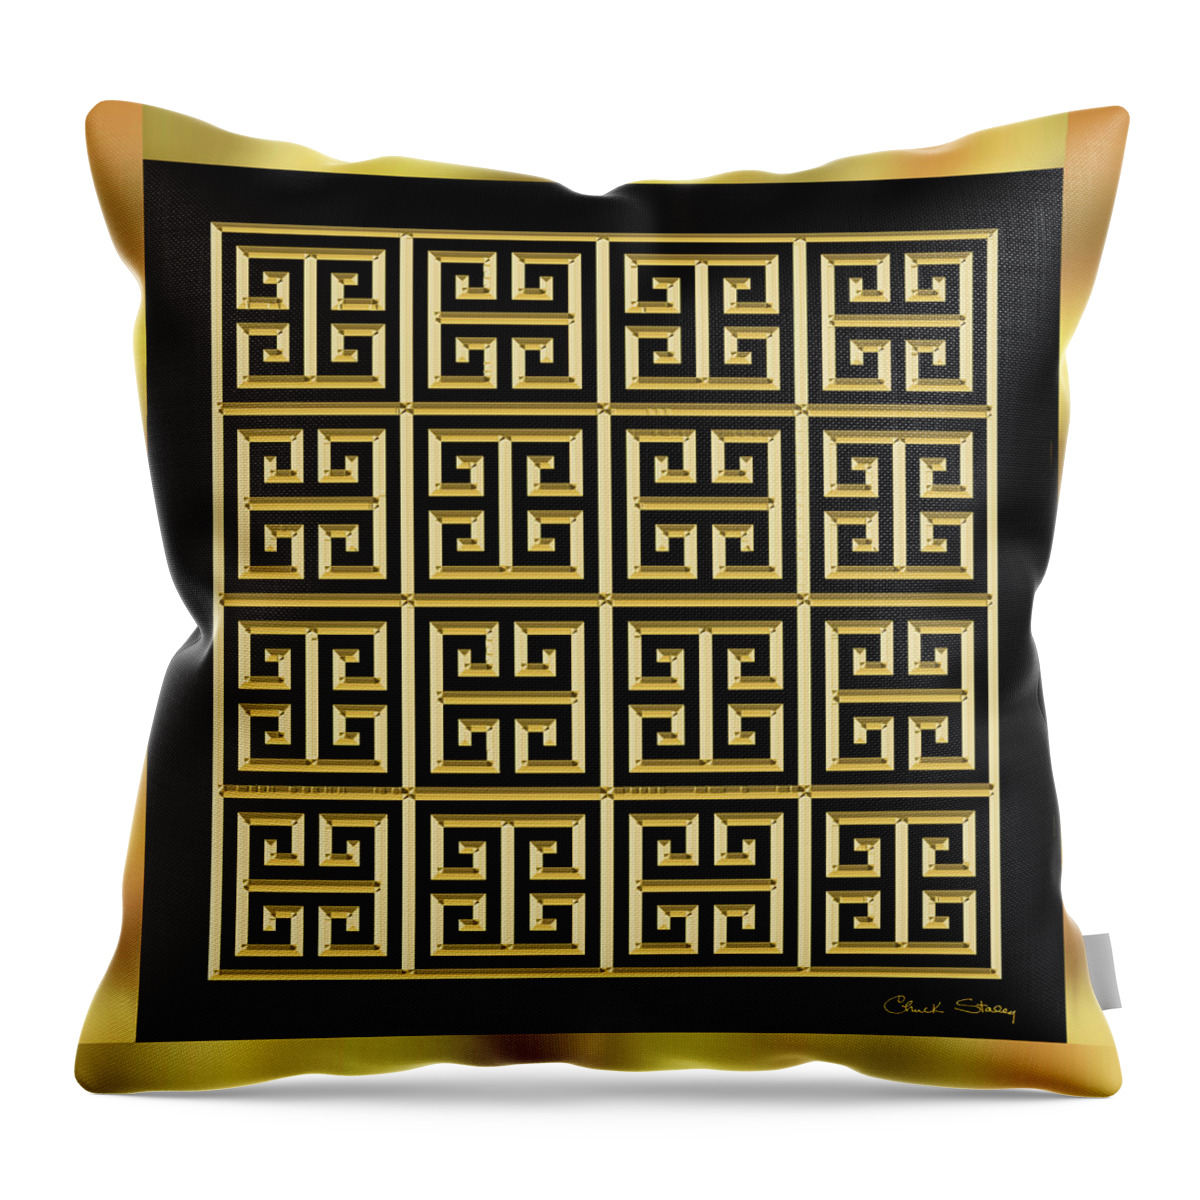 Black And Gold 11 - Chuck Staley Throw Pillow featuring the digital art Black and Gold 11 by Chuck Staley